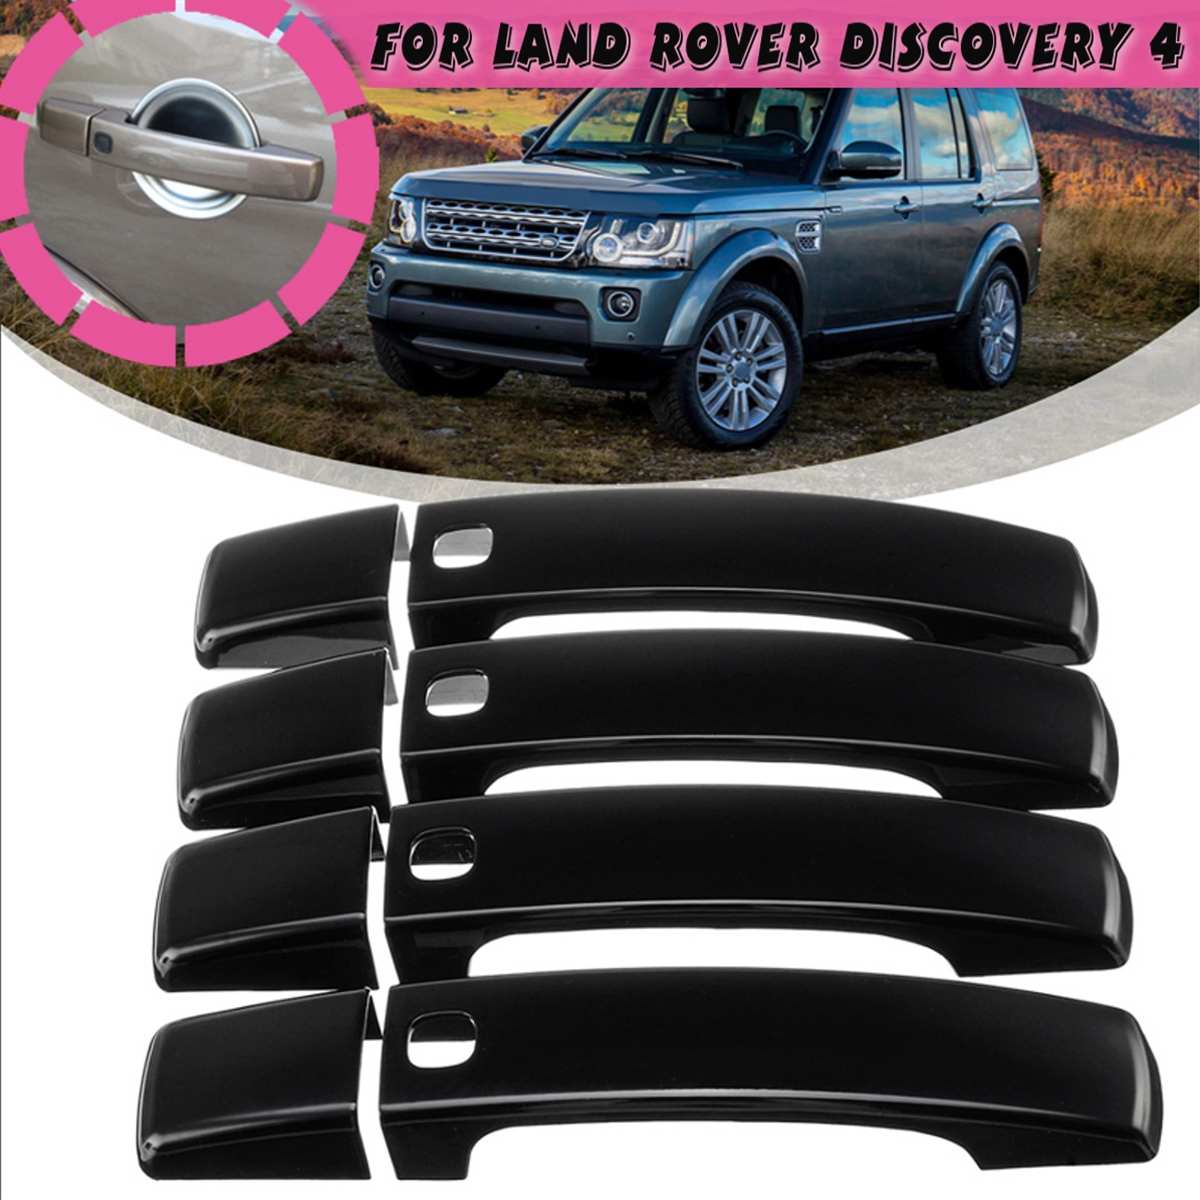 Abs Chrome Gloss Black Door Handle Covers Trim Car Accessories For Land Rover Discovery 4 Range Rover Sport Freelander 2: Gloss Black